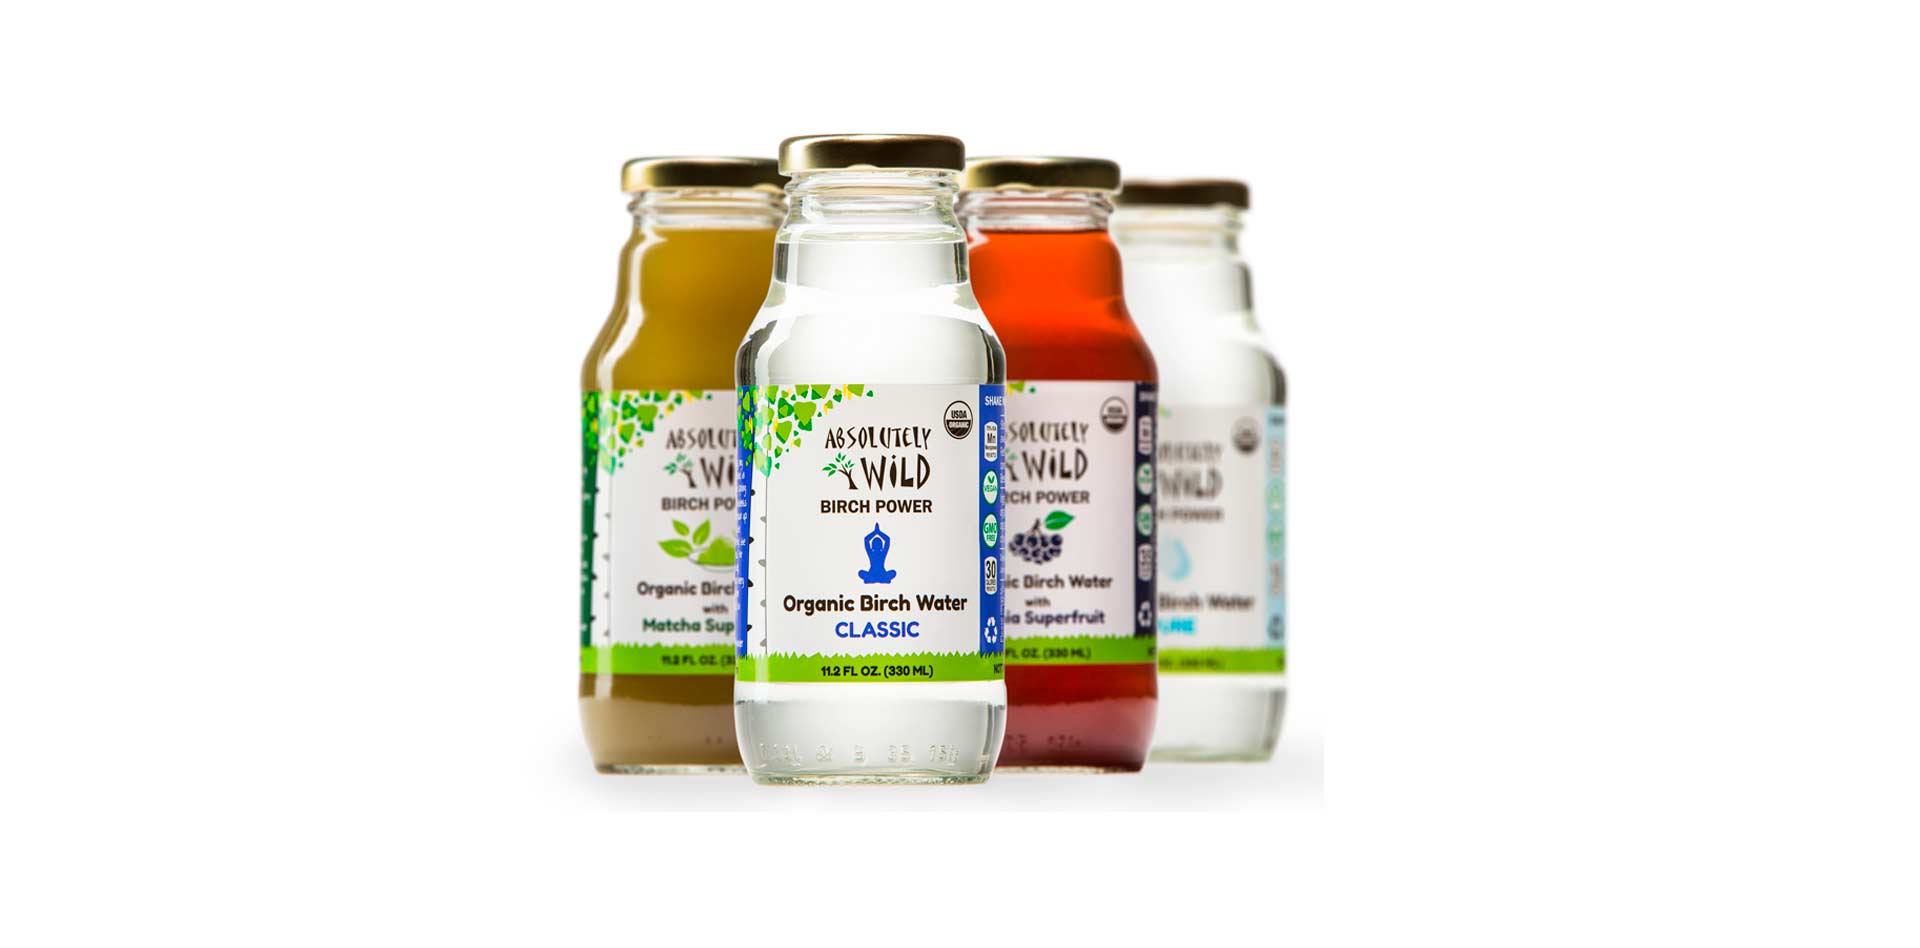 Absolutely Wild - Organic Birch Water now in USA